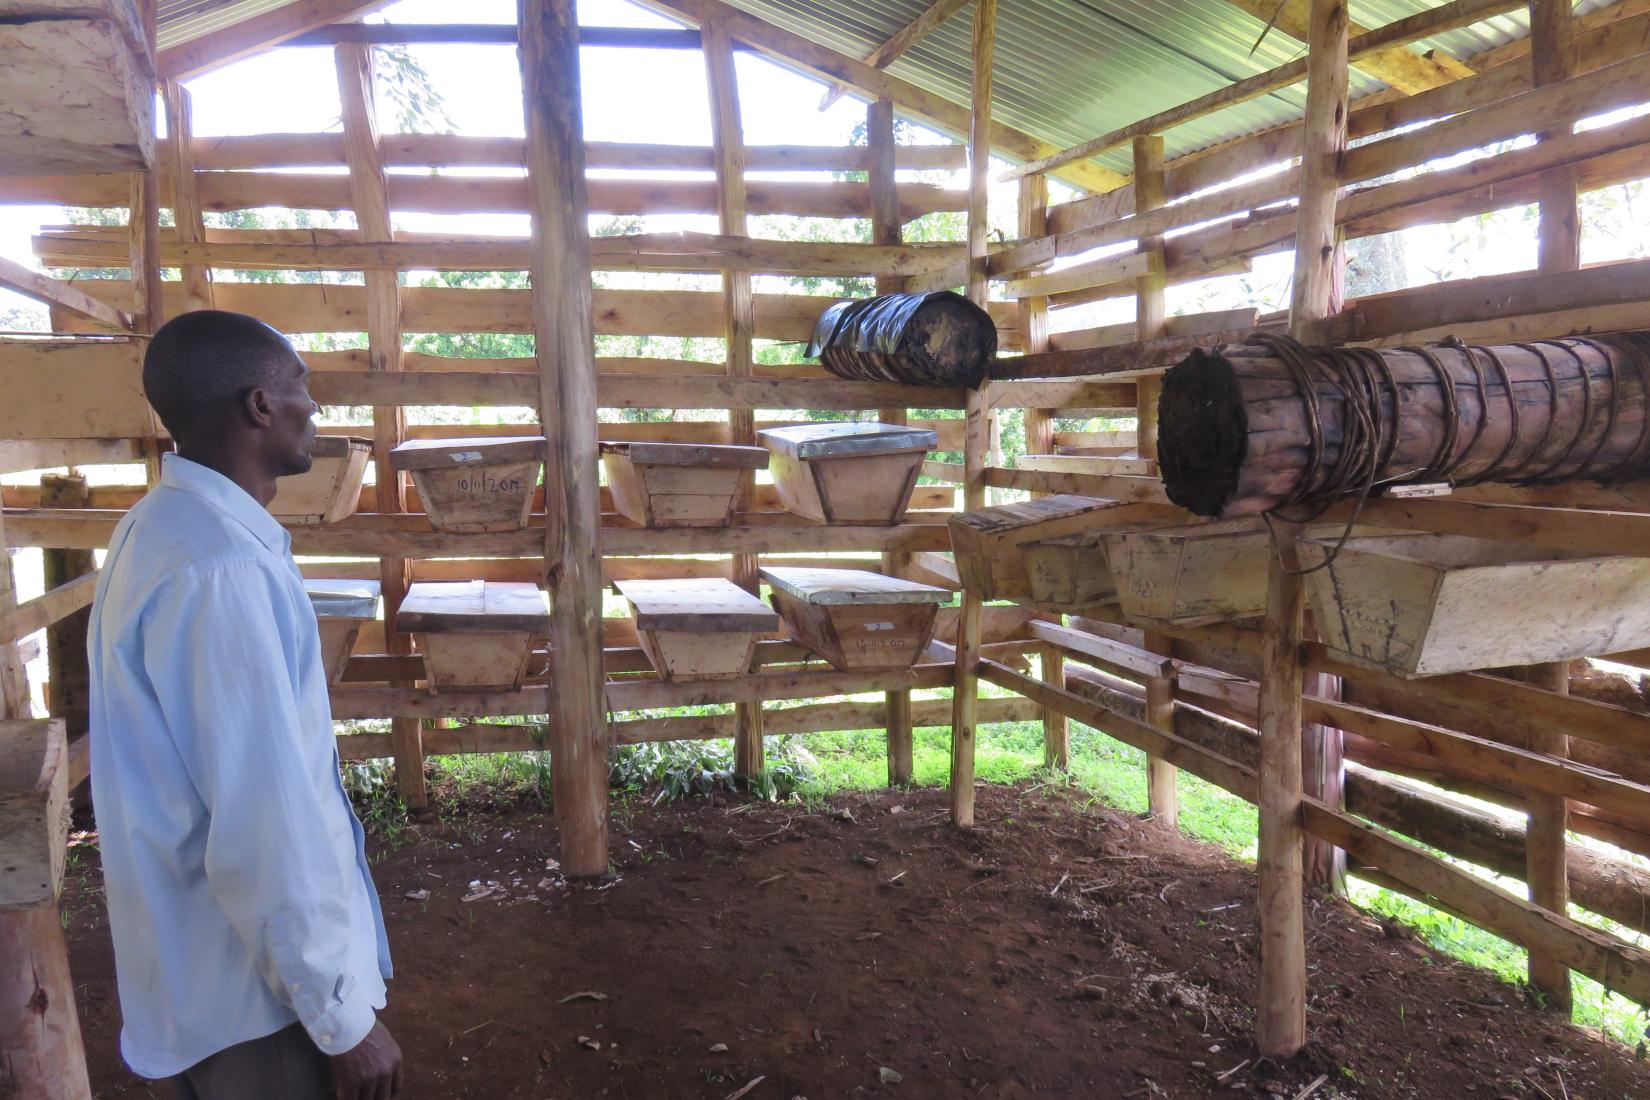 A bee hive house built by project participants enabling beekeepers to centralise their honey-production efforts.